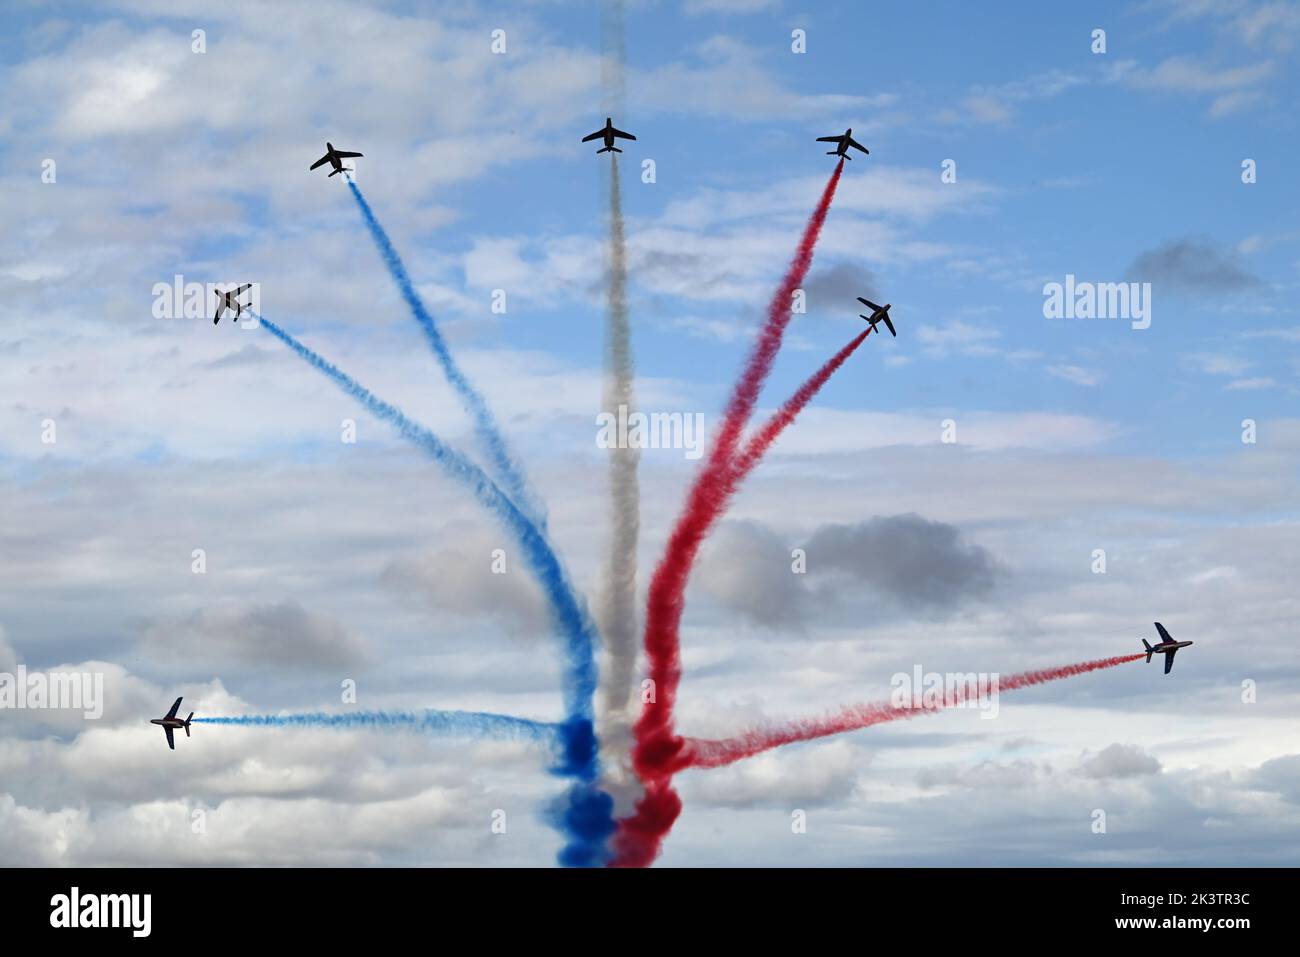 The french national jet team ''La patrouille de France'' gave a show on the former Francasal air base, near Toulouse. Stock Photo